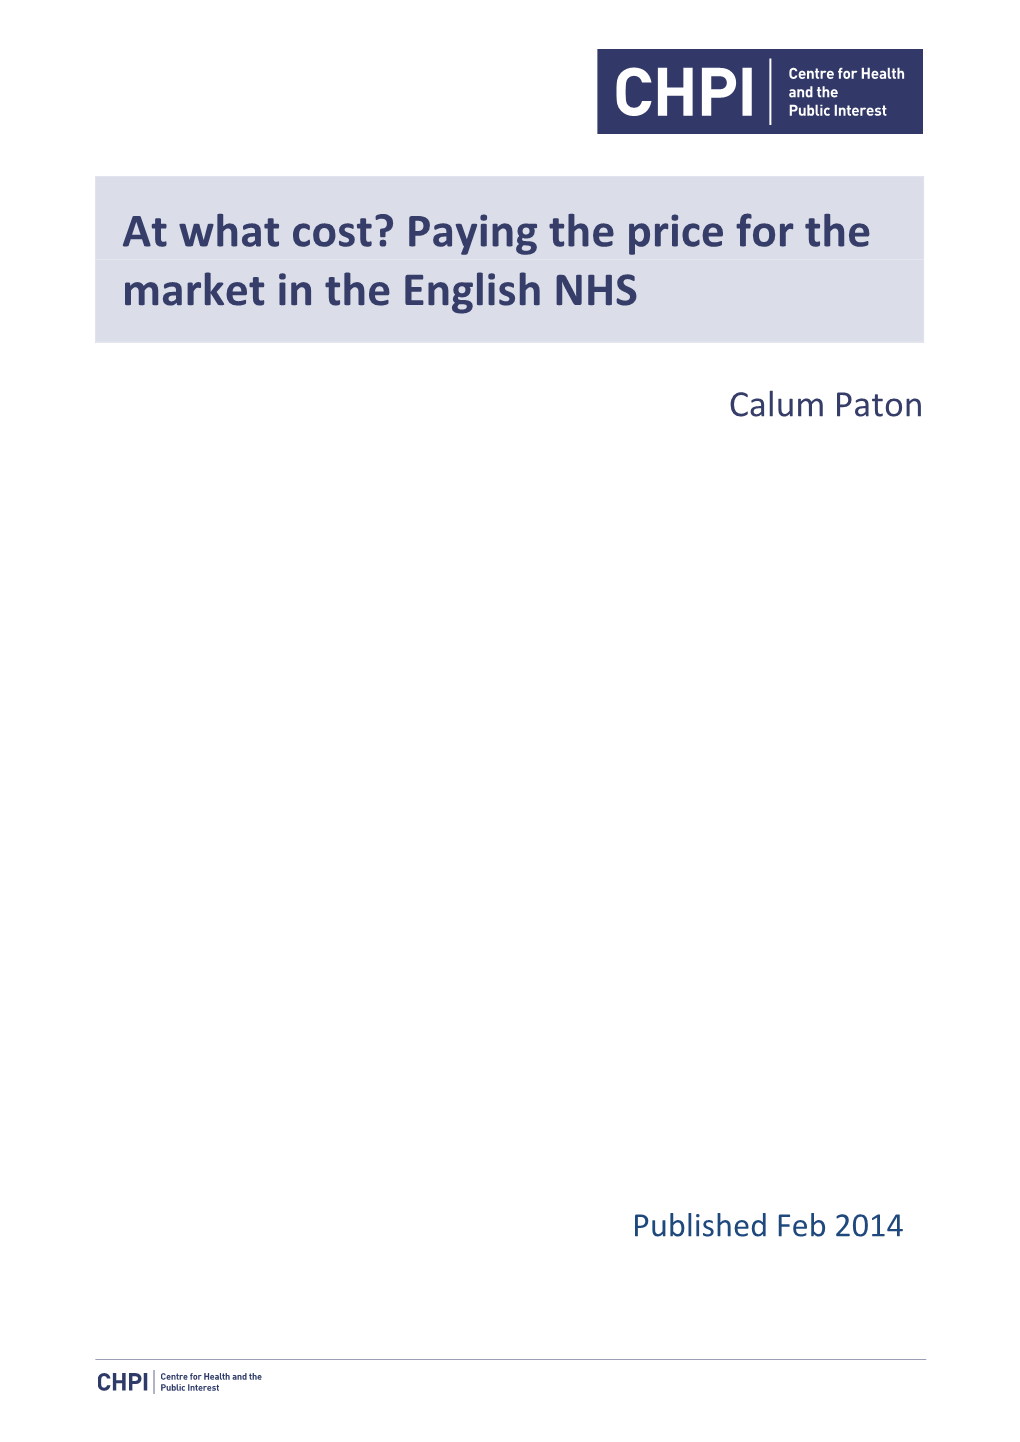 At What Cost? Paying the Price for the Market in the English NHS